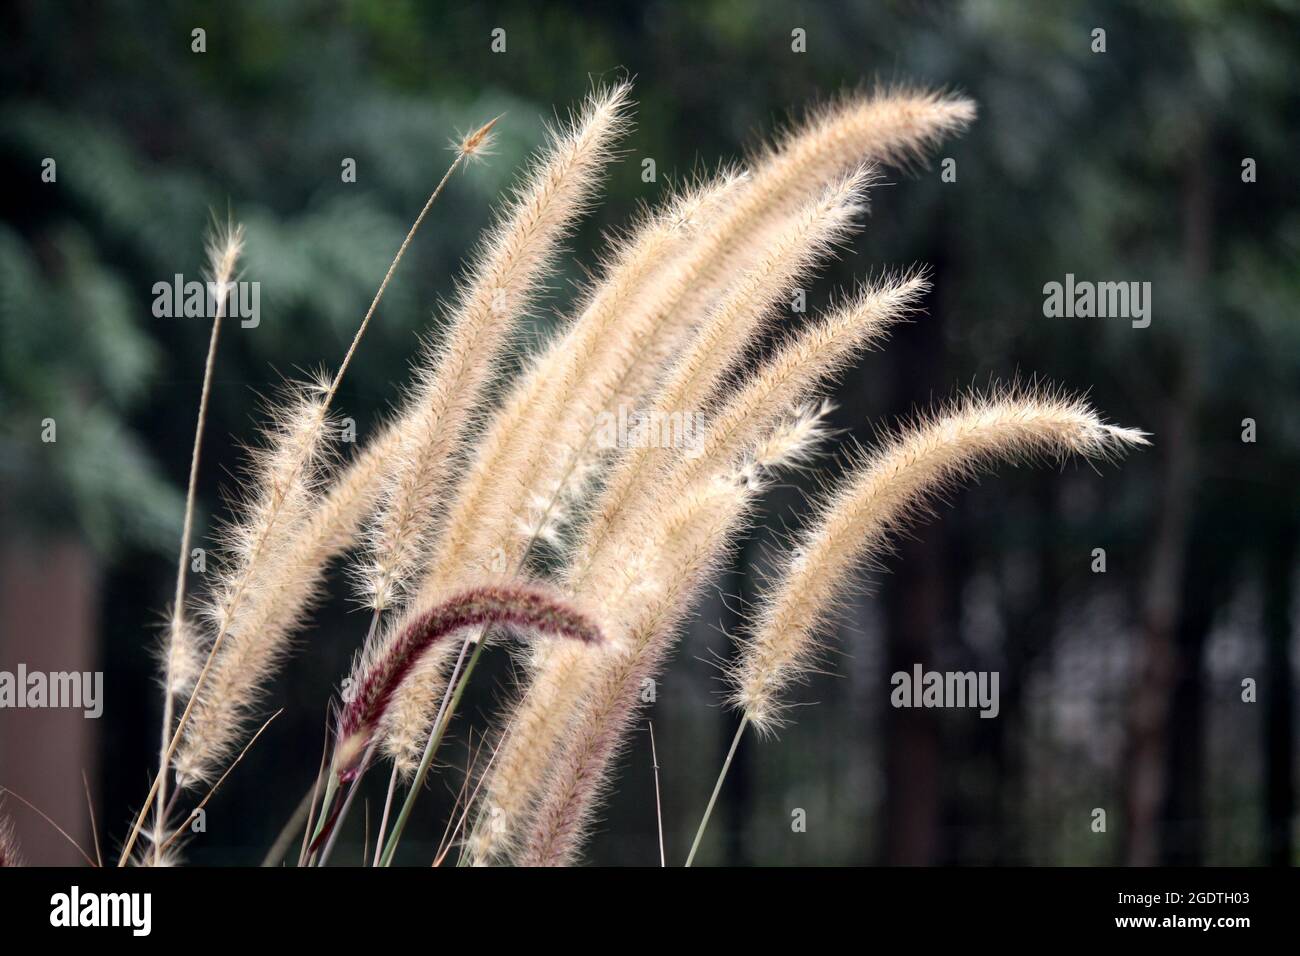 Inflorescence of Bristly foxtail grass (Setaria parviflora) Stock Photo